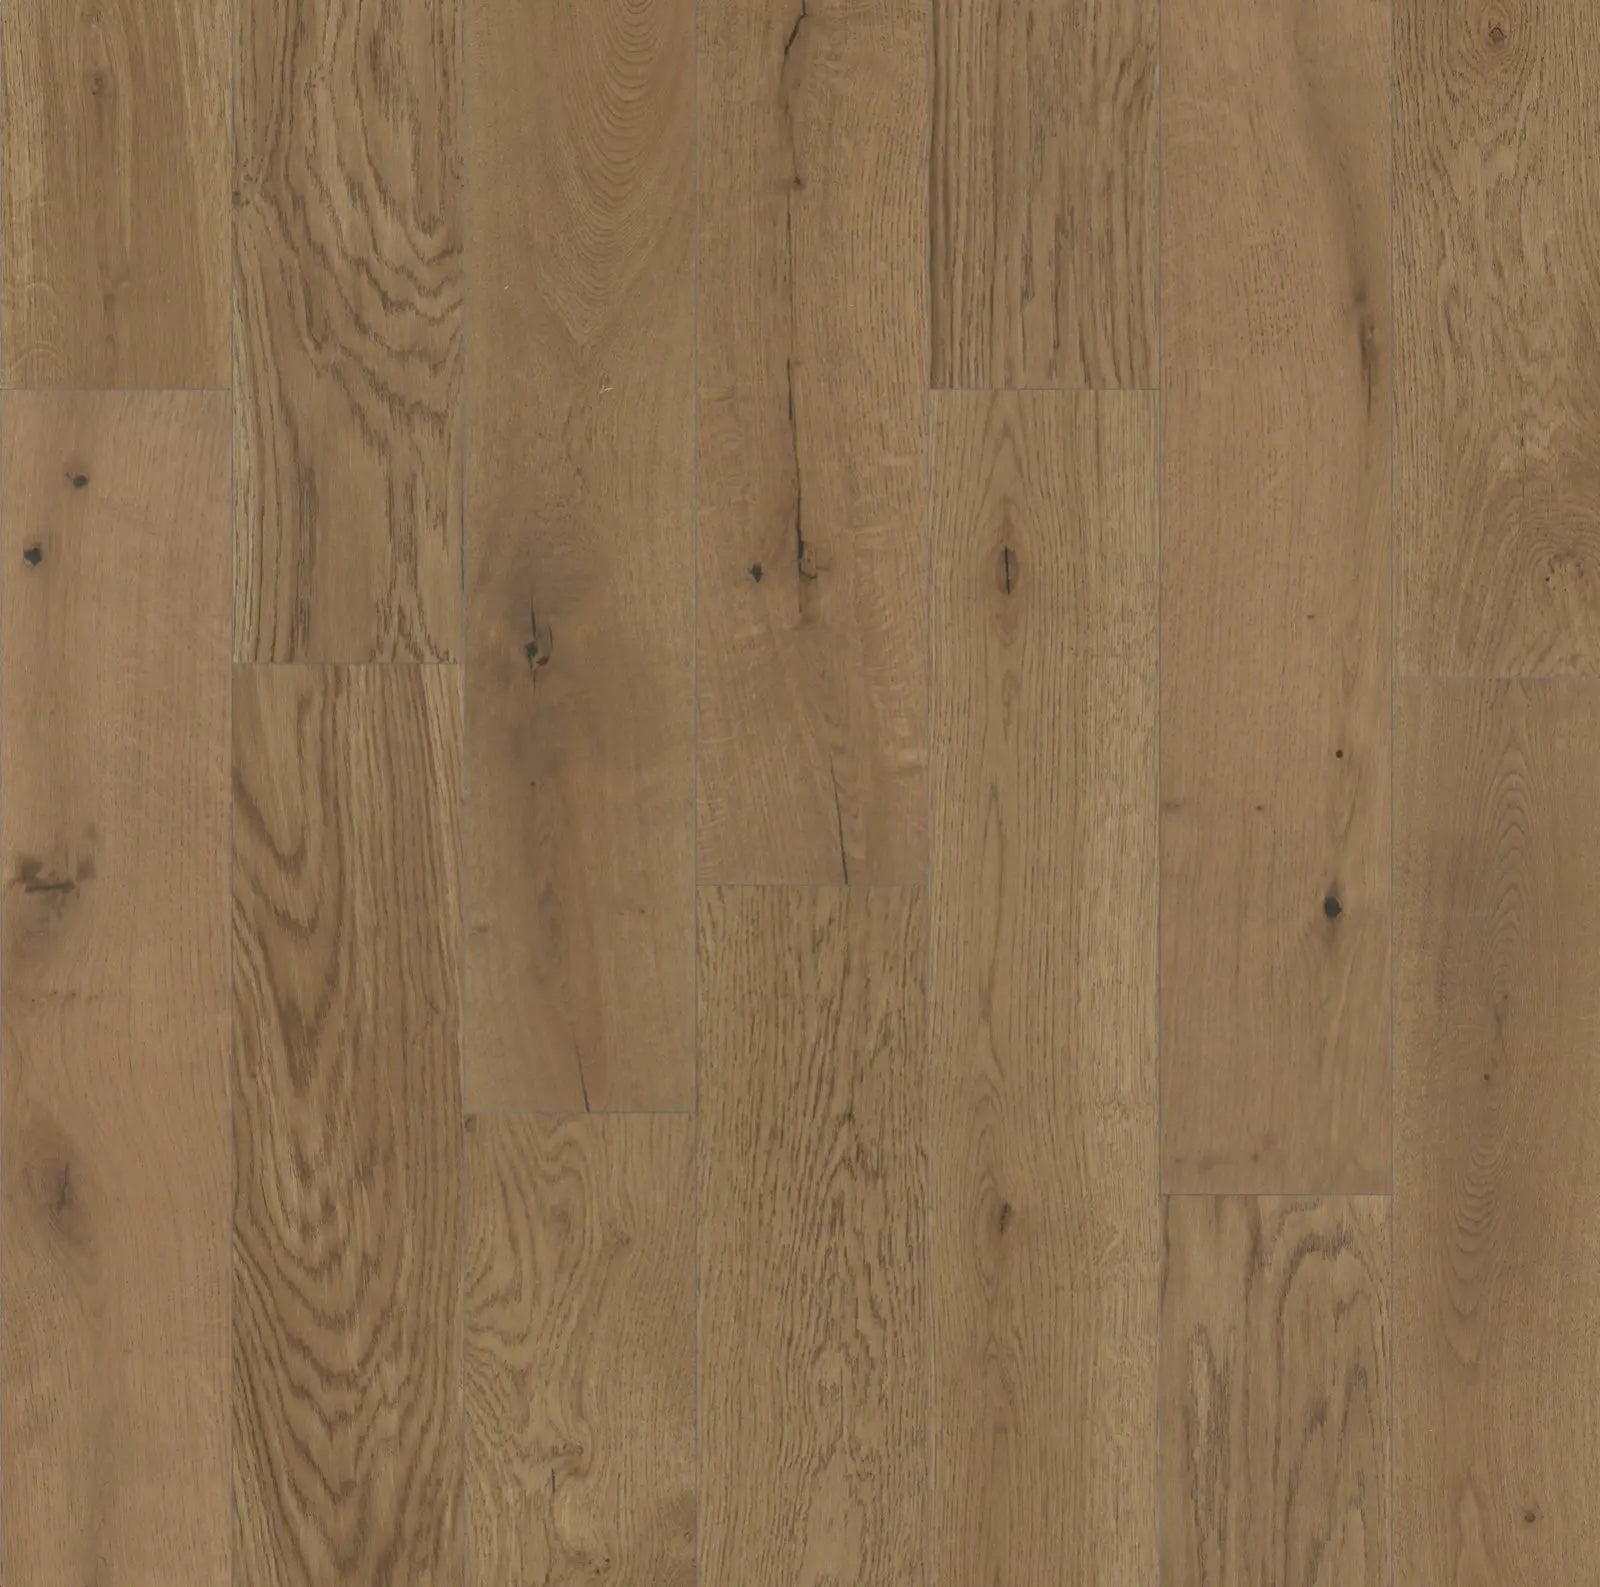 MSW65 Oak Bedford 5/8 x 7-1/2" Wire Brushed Engineered- Call 844-356-6711 for BEST price! MW floors